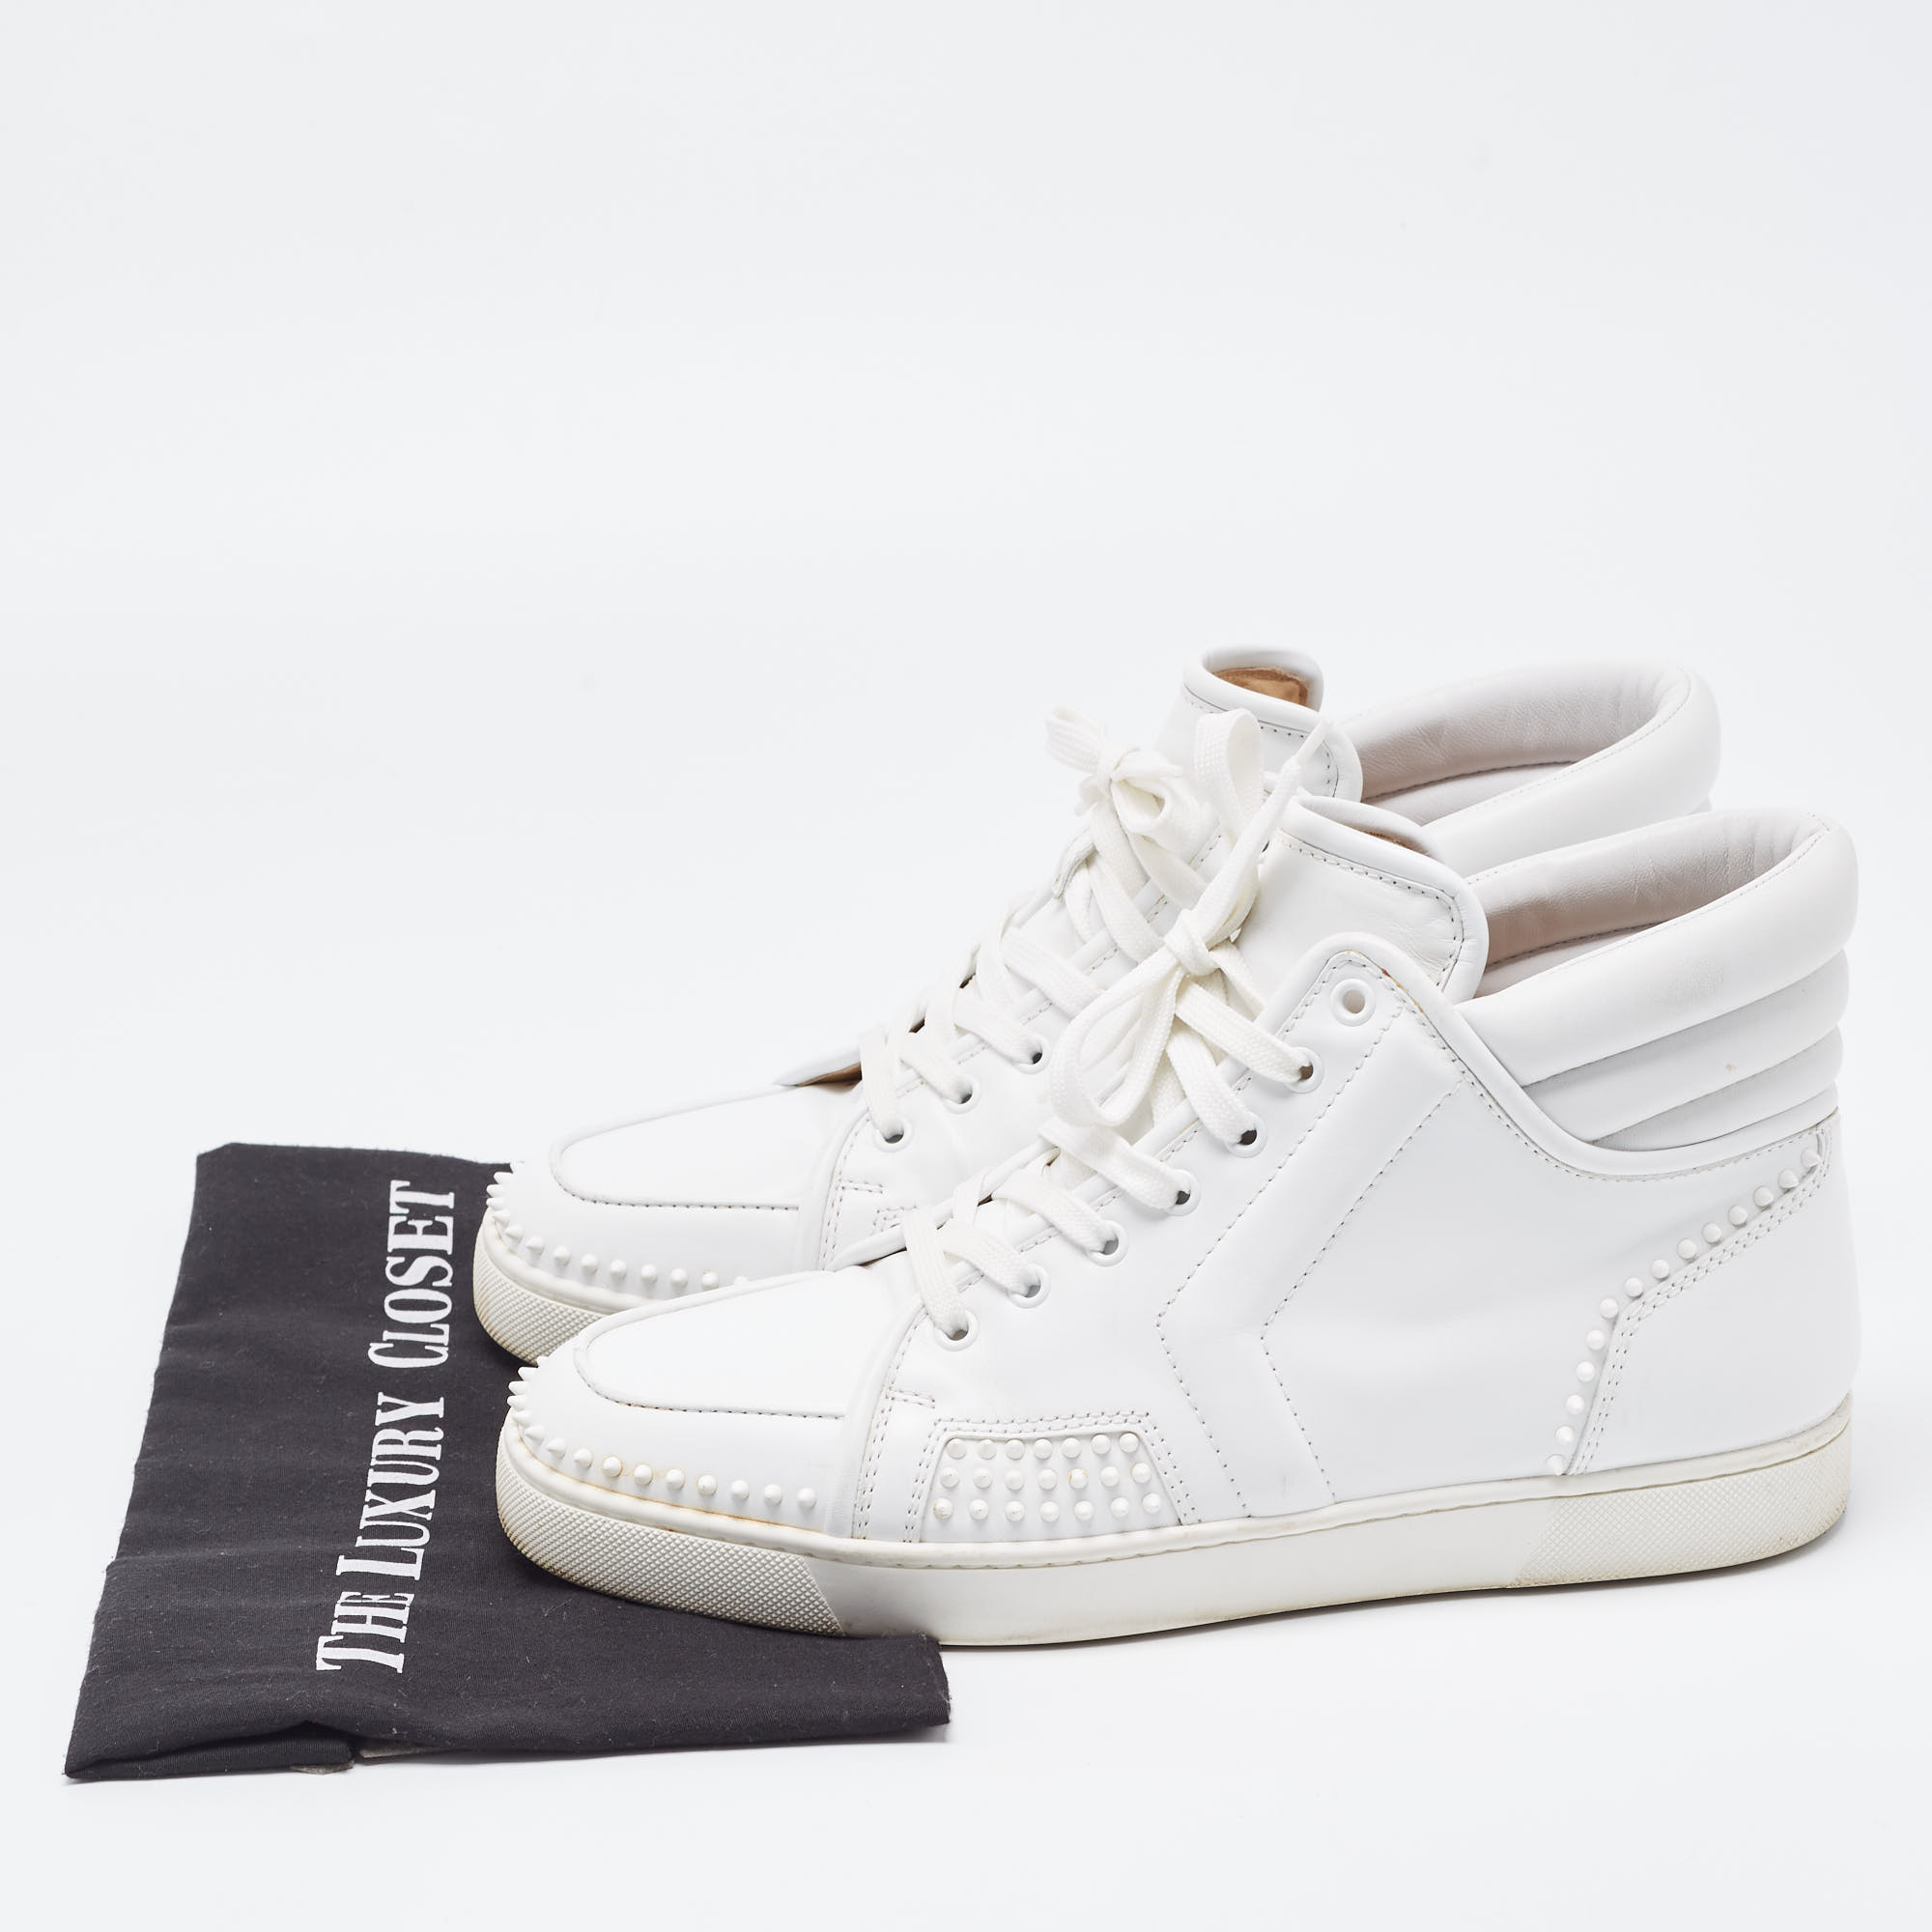 Christian Louboutin White Leather High Top Sneakers Size 43